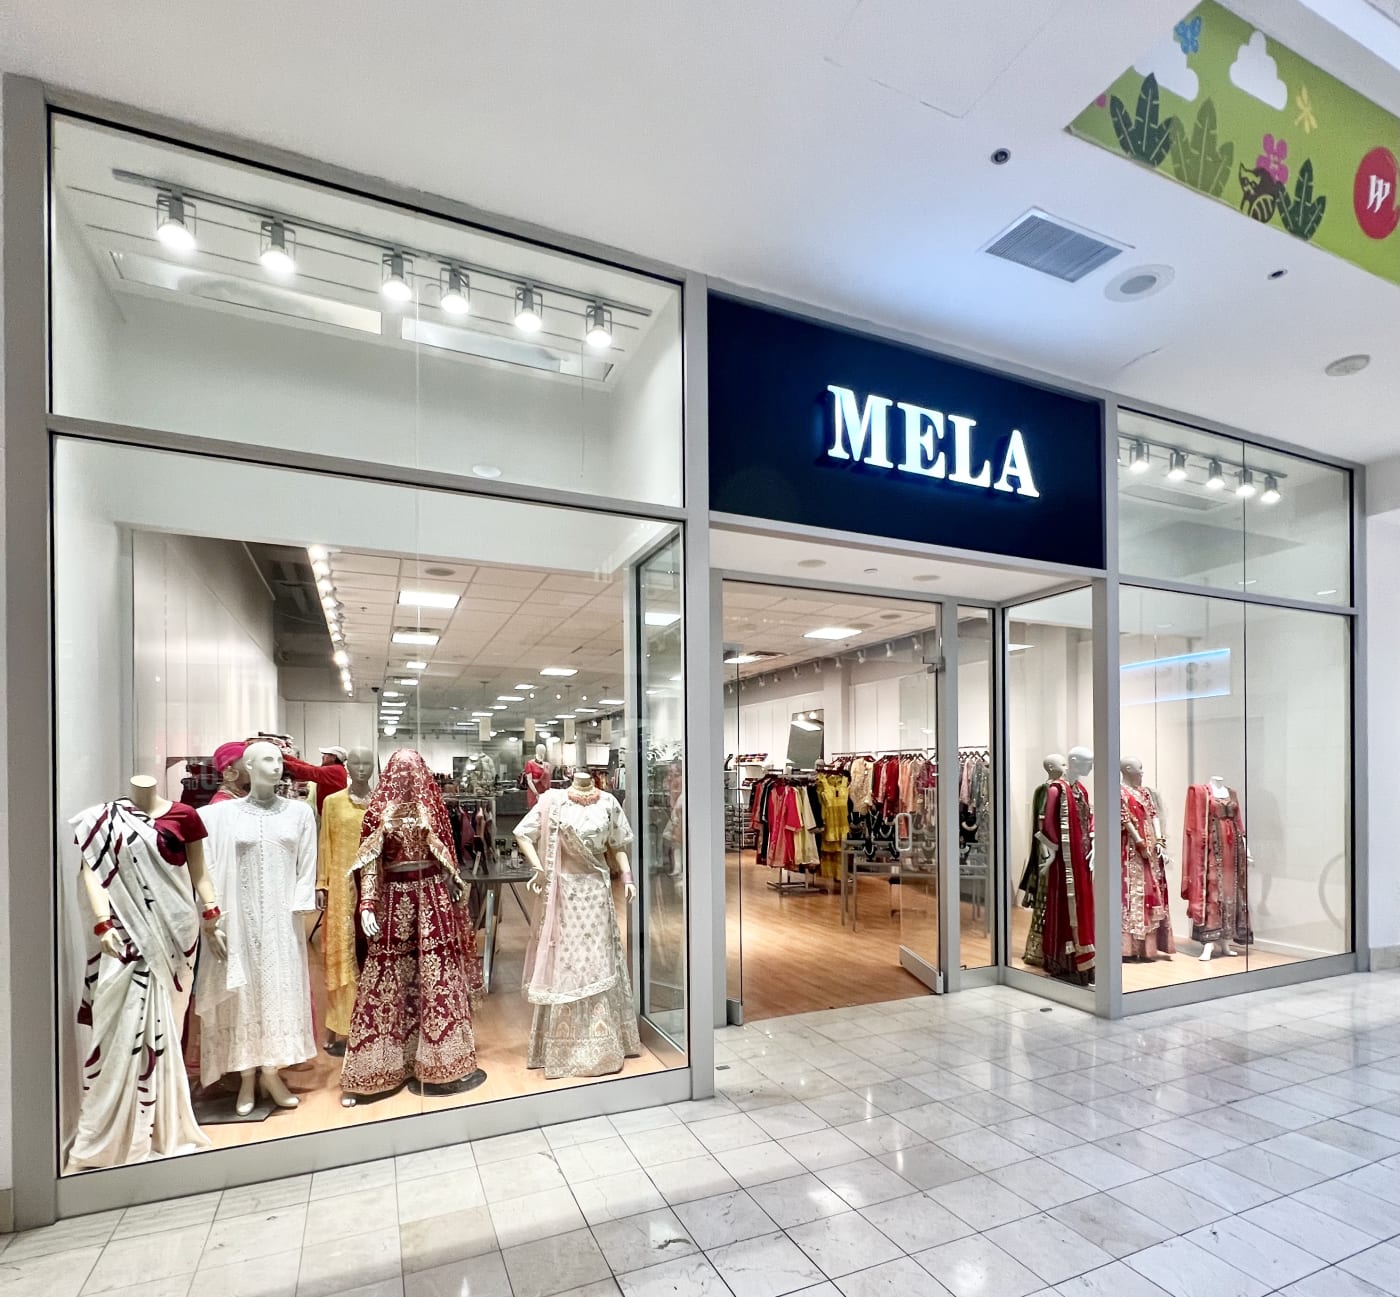 Mela storefront at Westfield Montgomery Mall in Bethesda